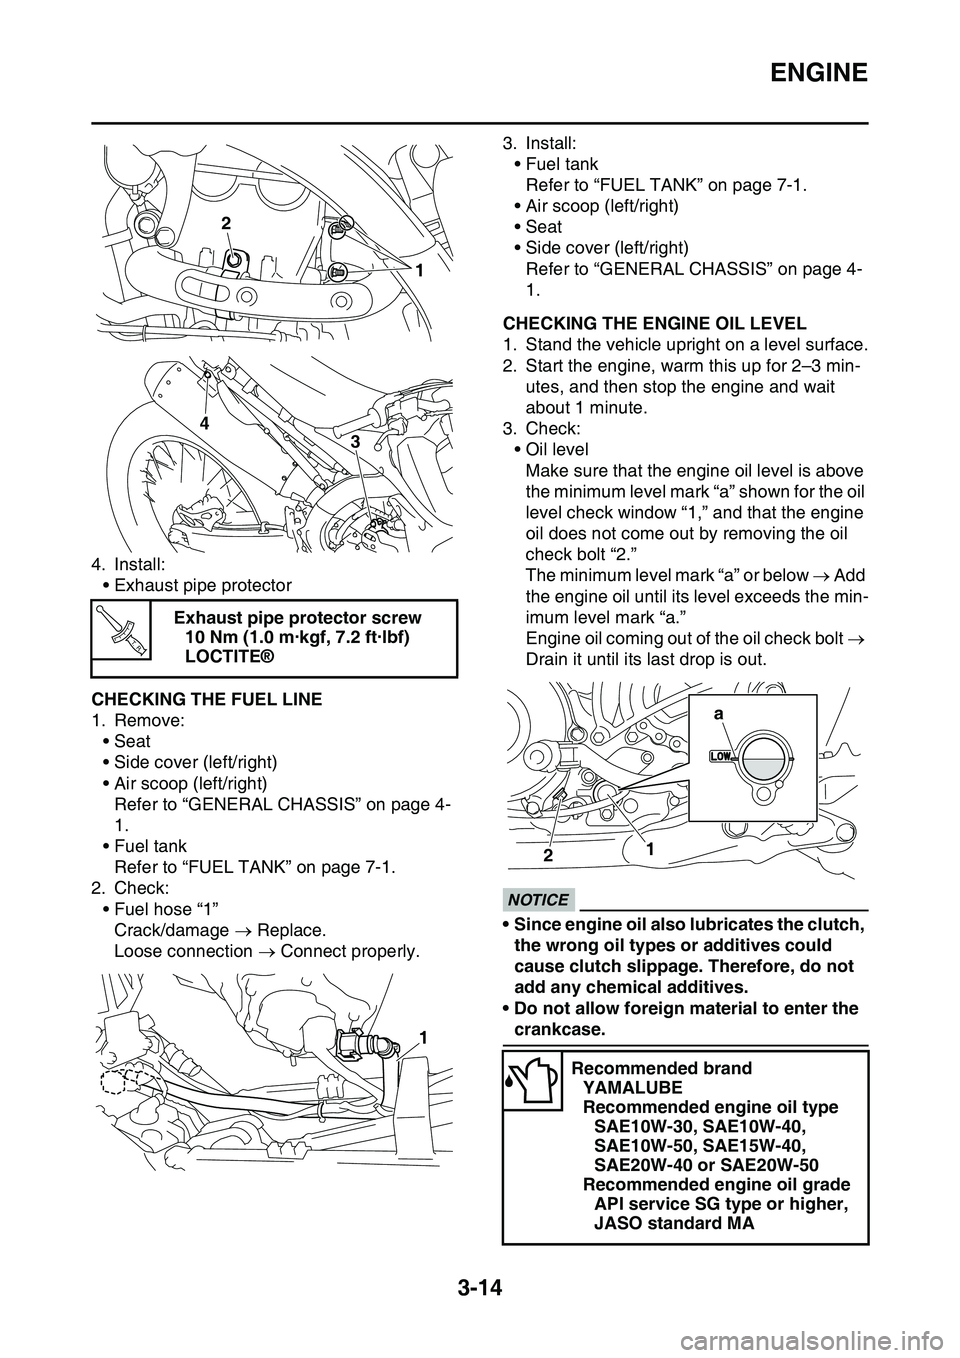 YAMAHA YZ450F 2014  Owners Manual ENGINE
3-14
4. Install:
• Exhaust pipe protector
EAS1SL1084CHECKING THE FUEL LINE
1. Remove:
• Seat
• Side cover (left/right)
• Air scoop (left/right)
Refer to “GENERAL CHASSIS” on page 4-